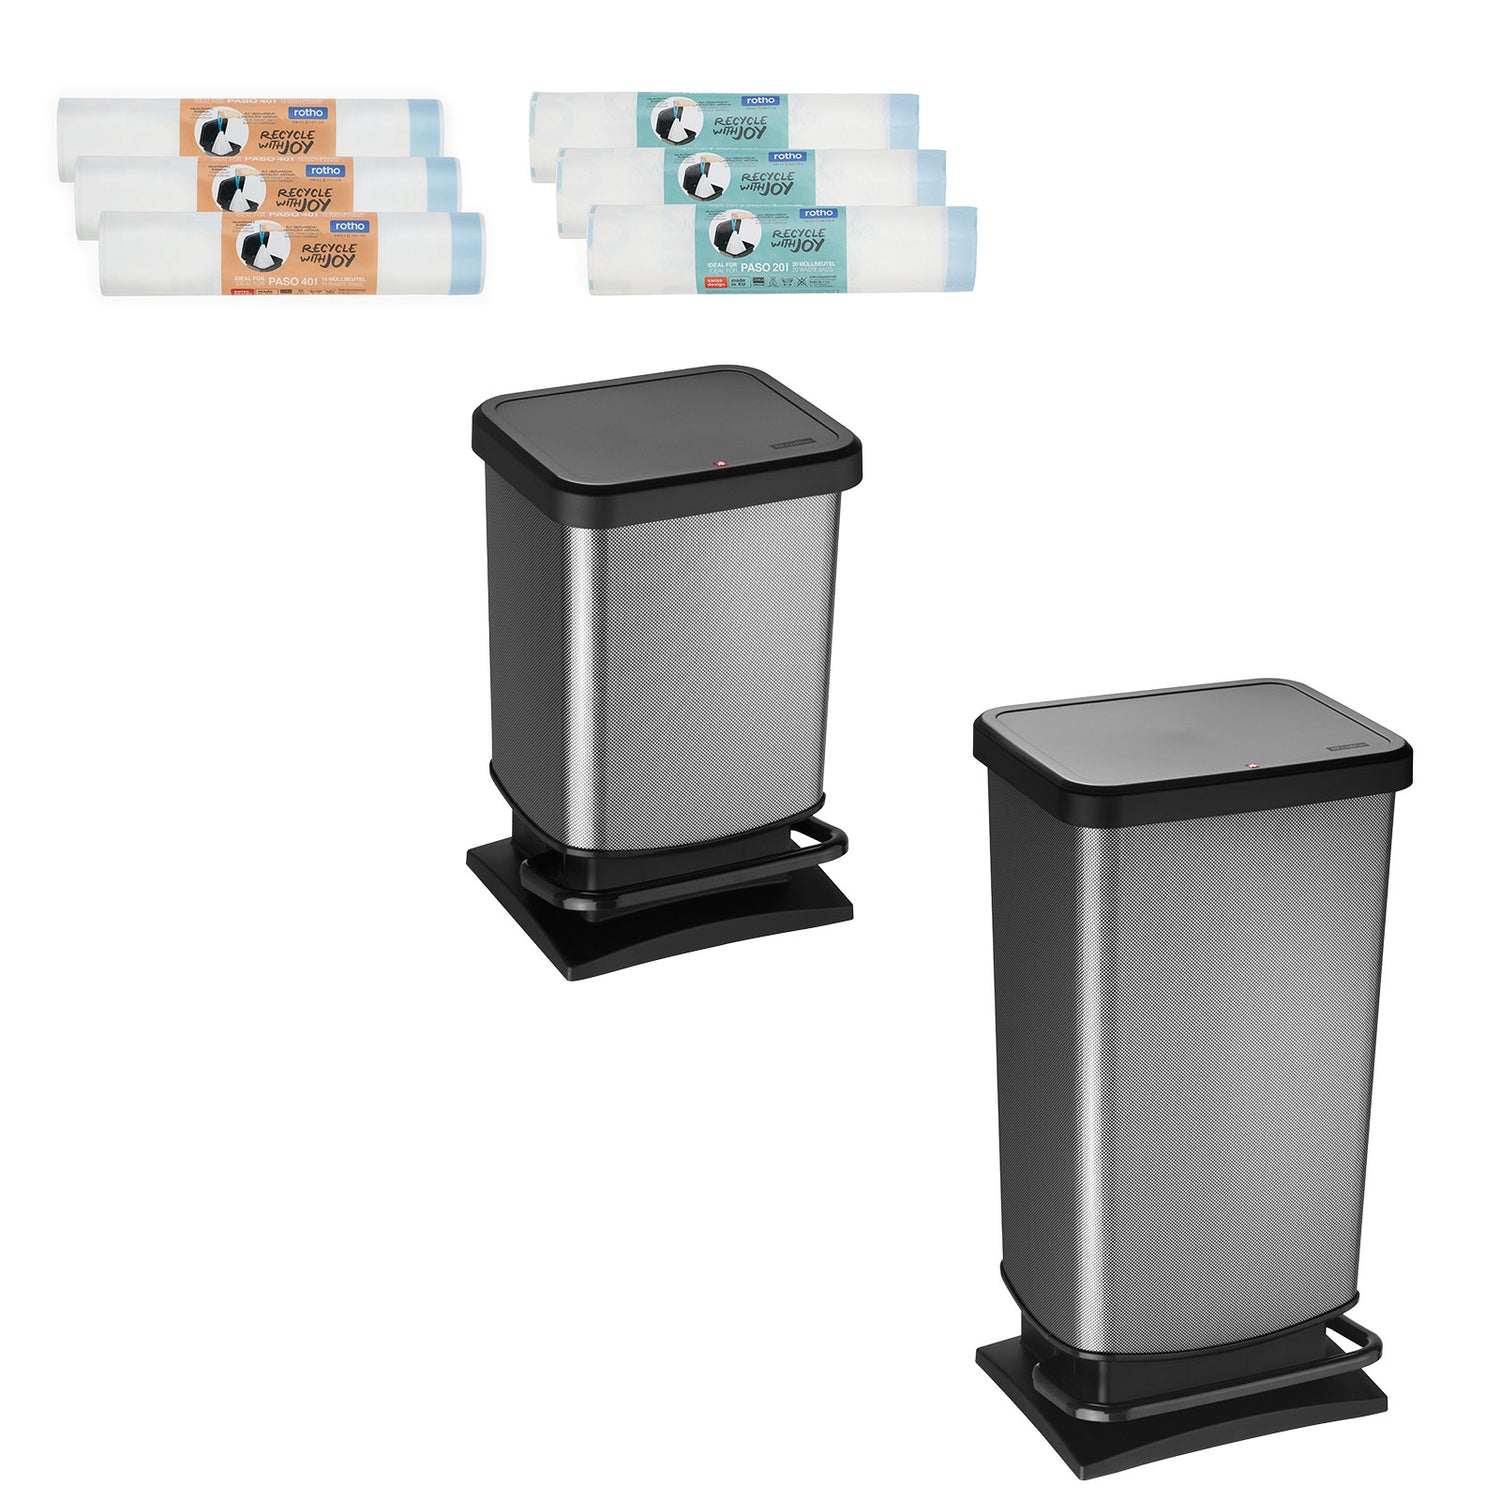 Set of 4 pedal bins 20 l and 40 l incl. bin liners PASO